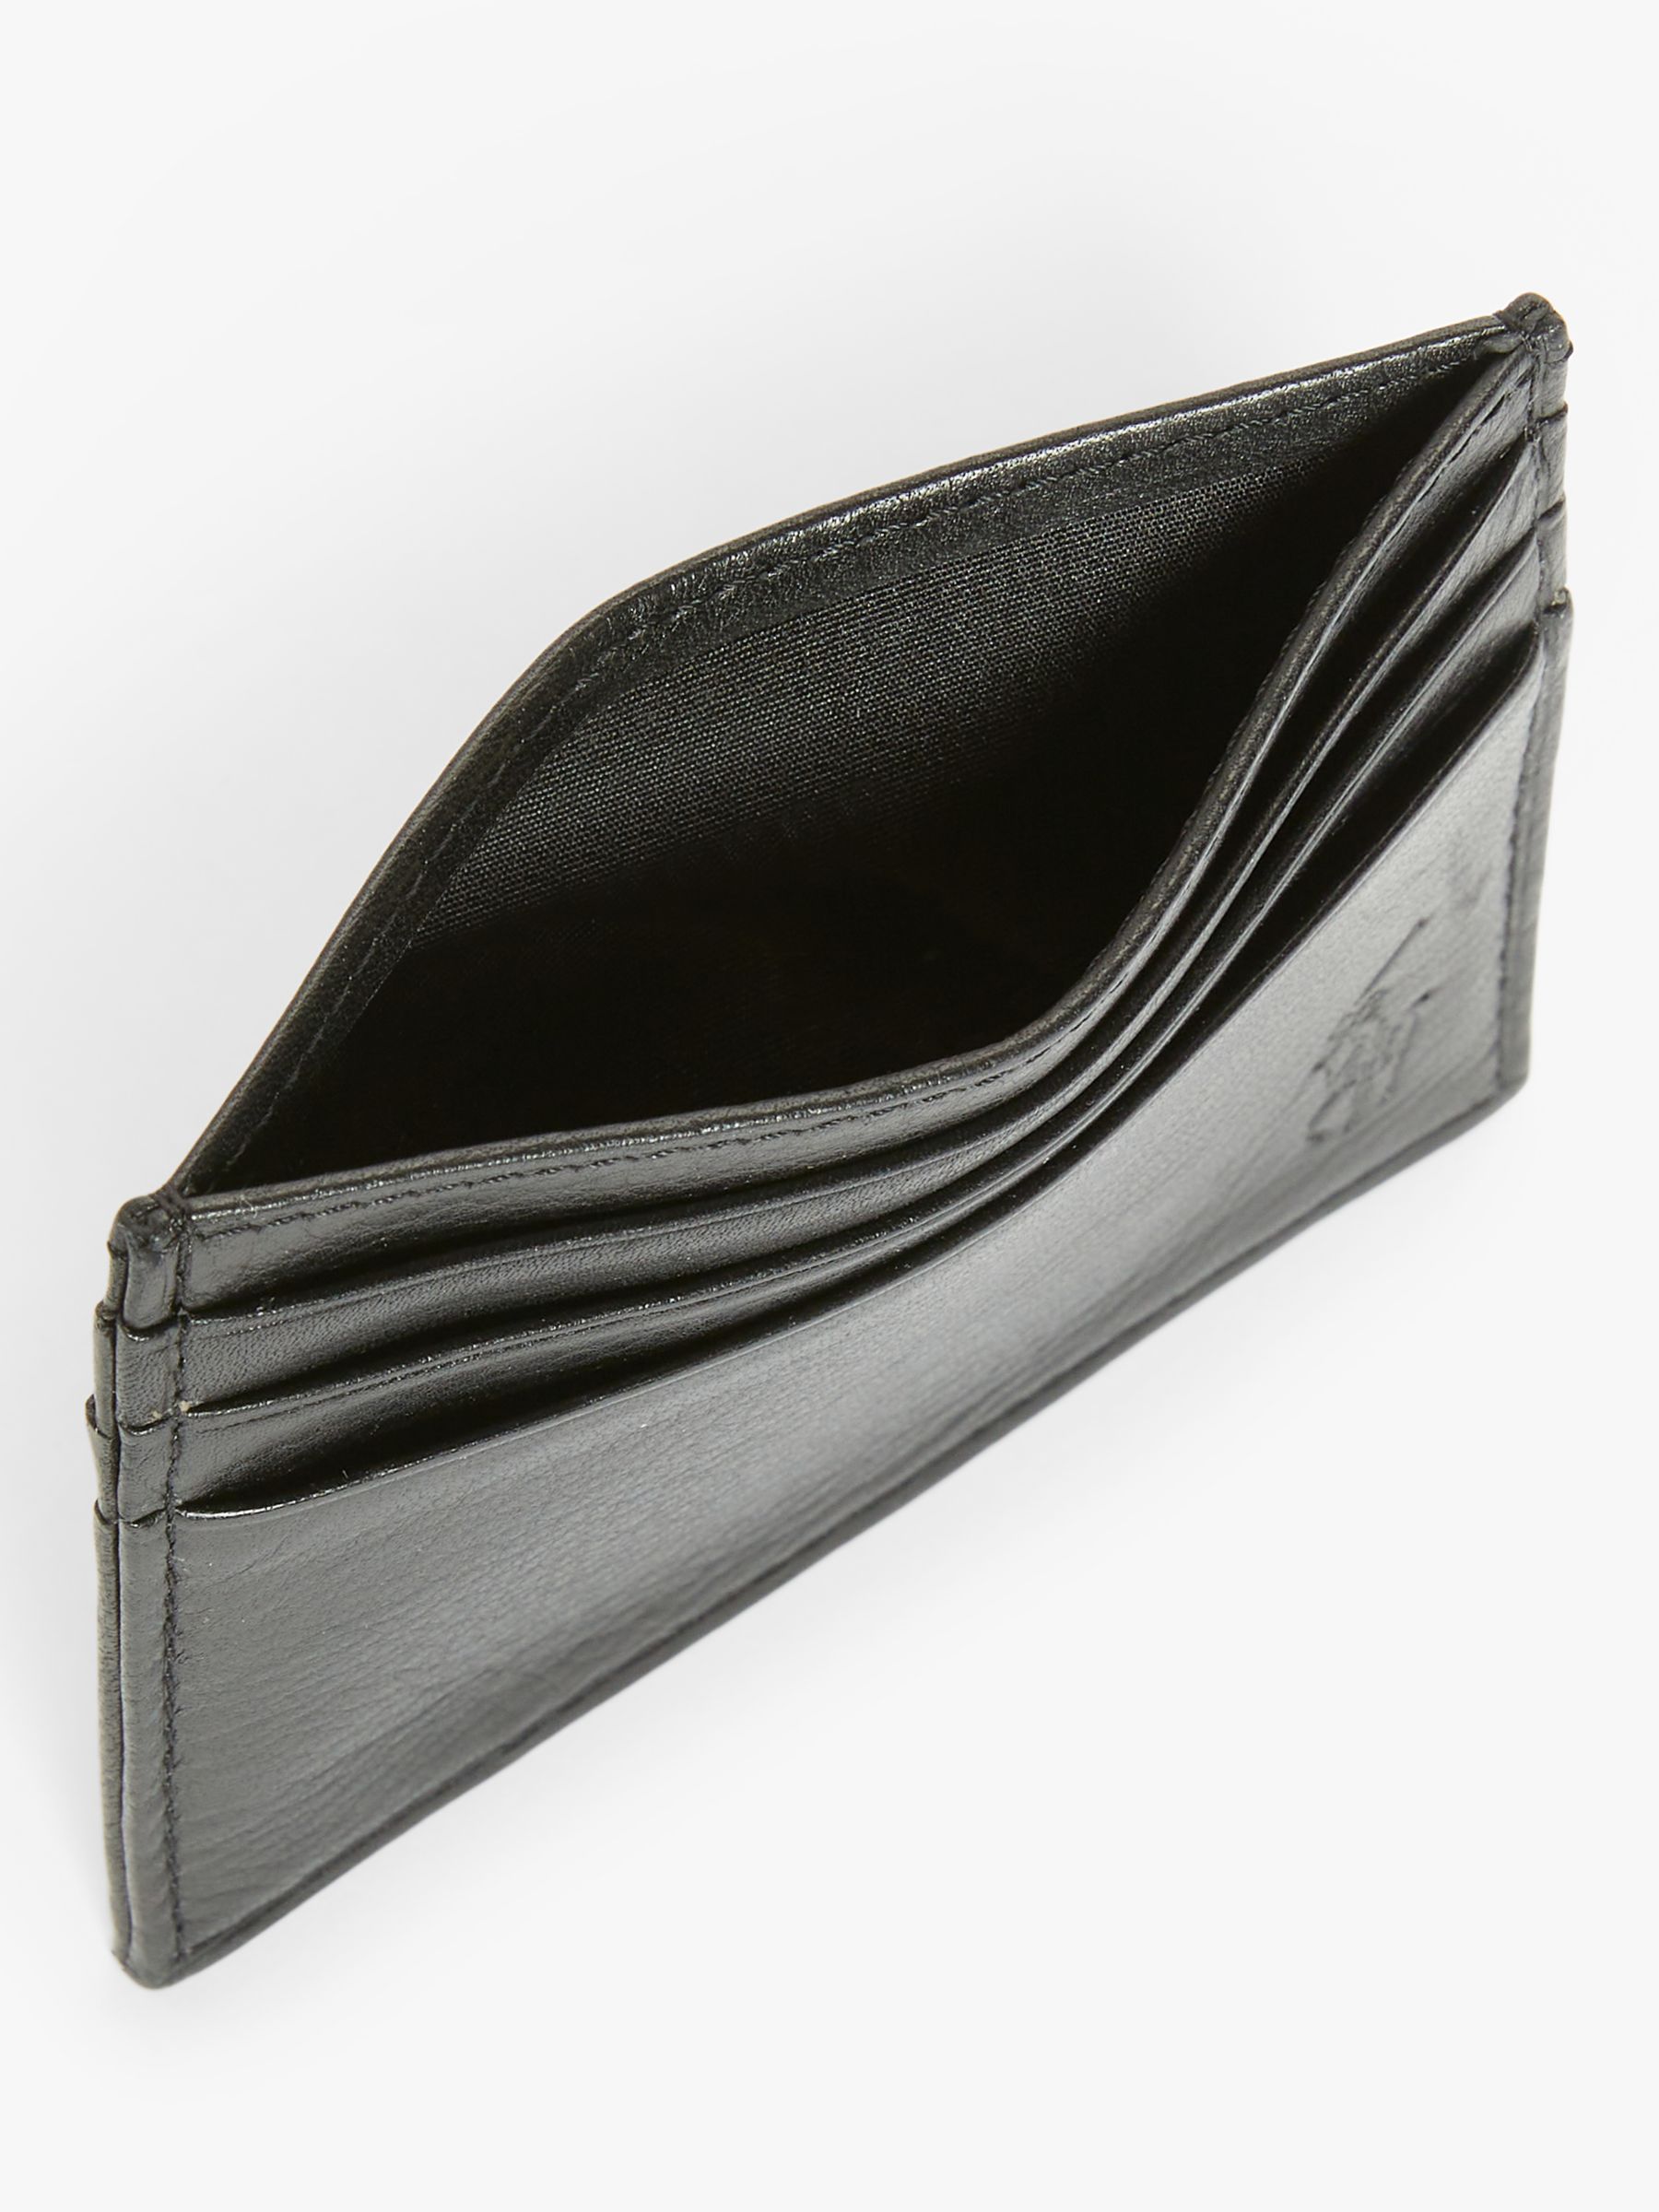 Buy Polo Ralph Lauren Pebble Leather Card Holder Online at johnlewis.com